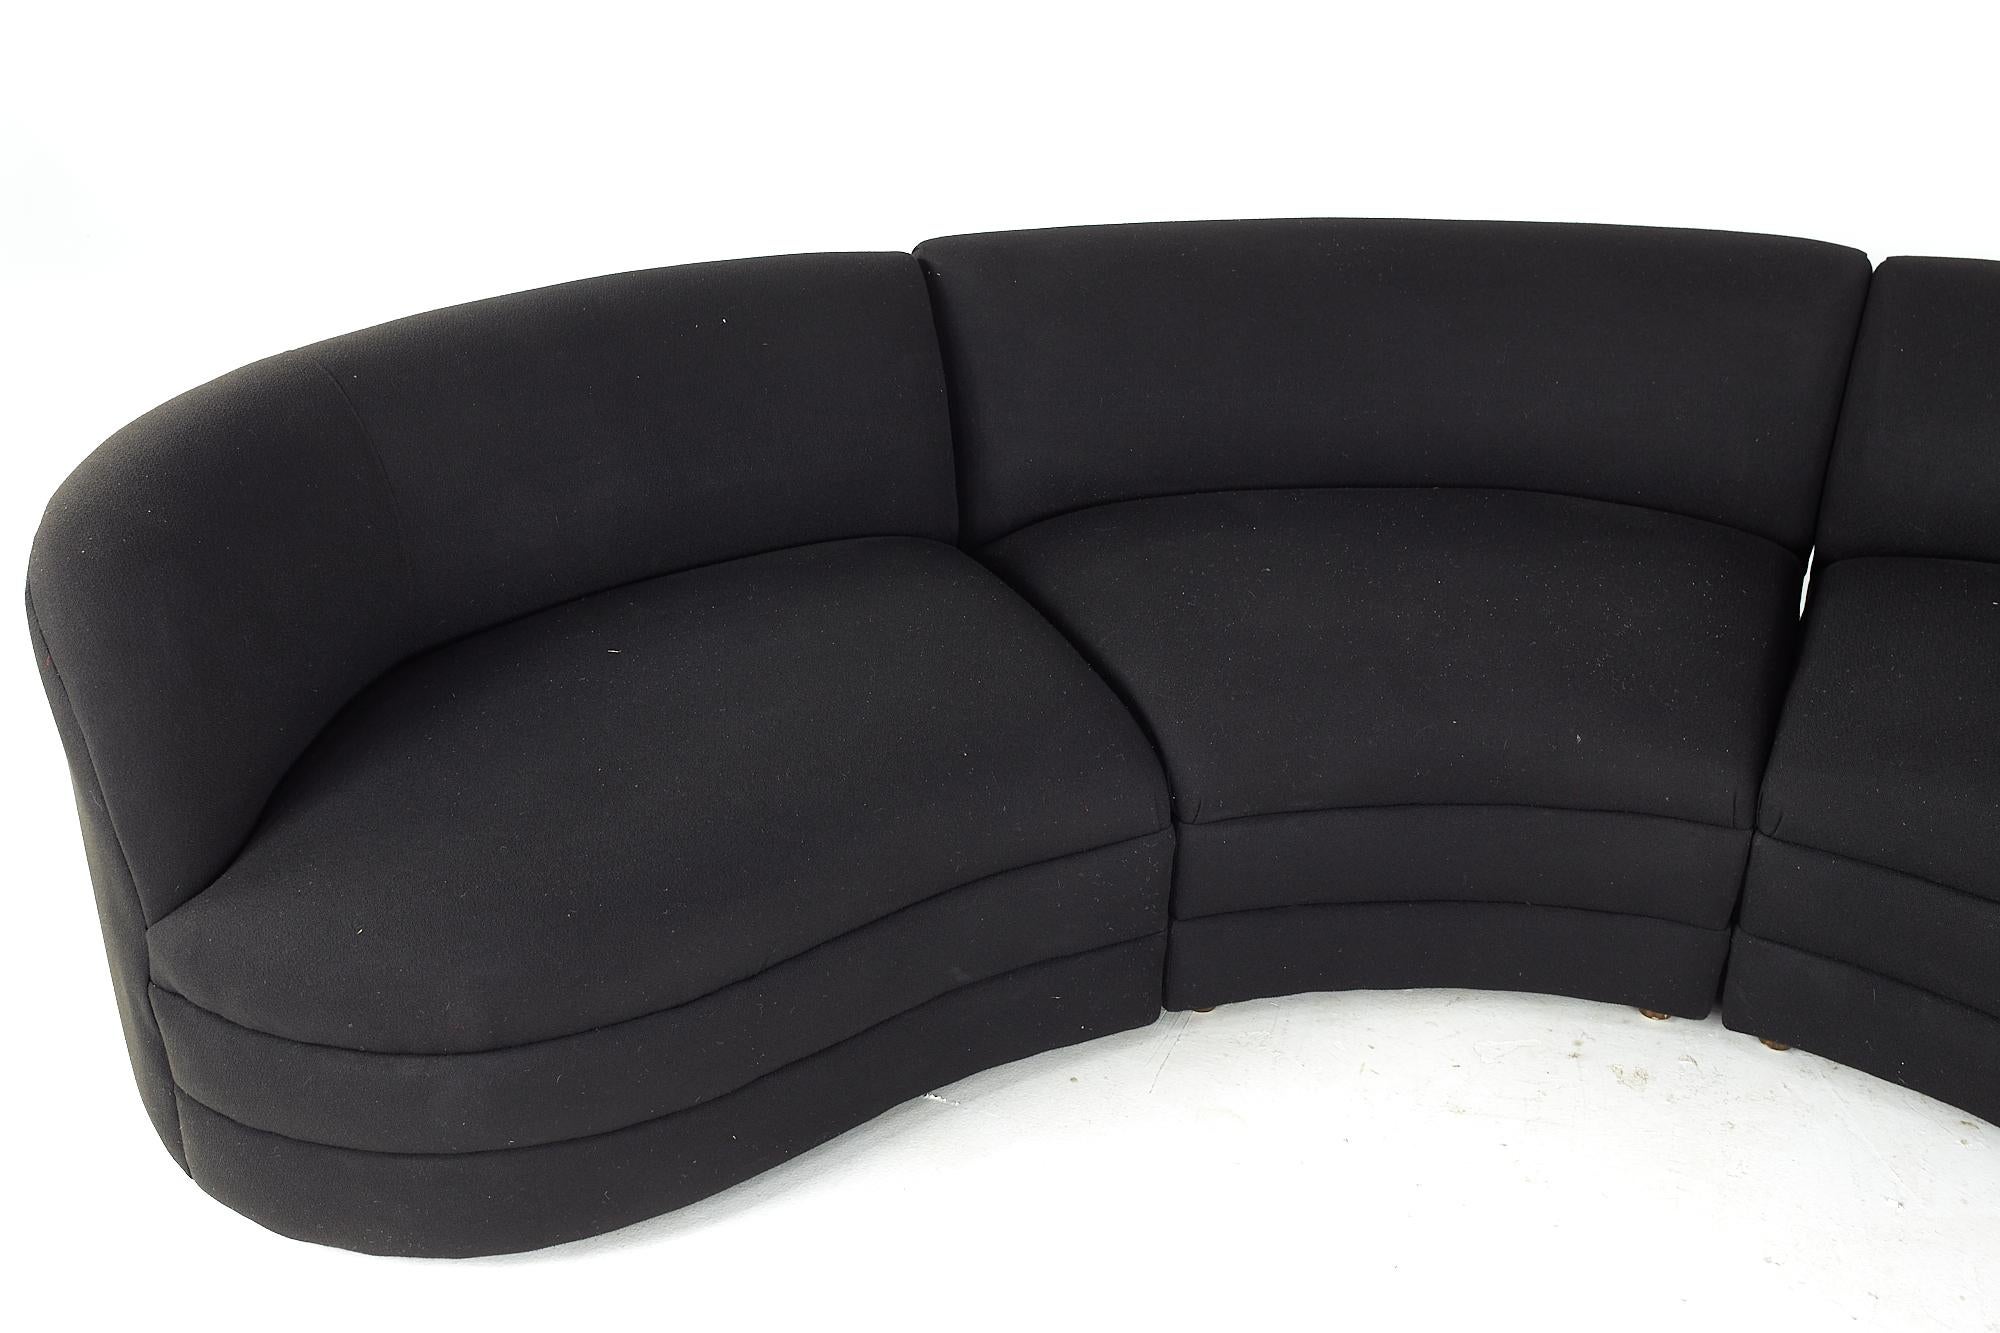 American Weiman Midcentury Curved Sectional Sofa